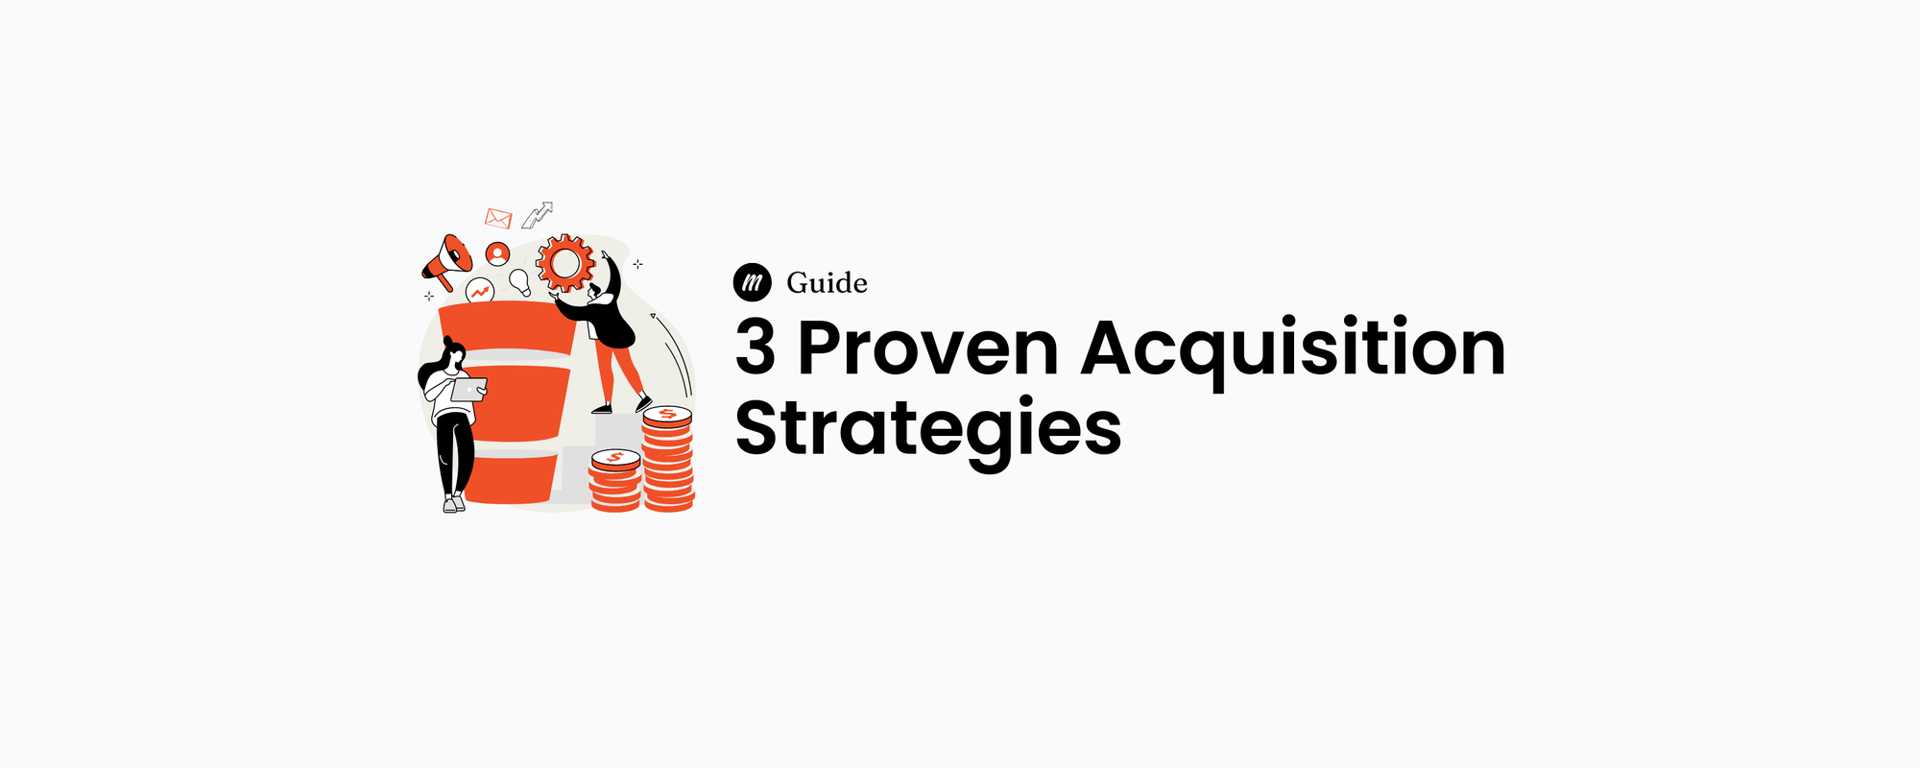 3 Proven Acquisition Strategies